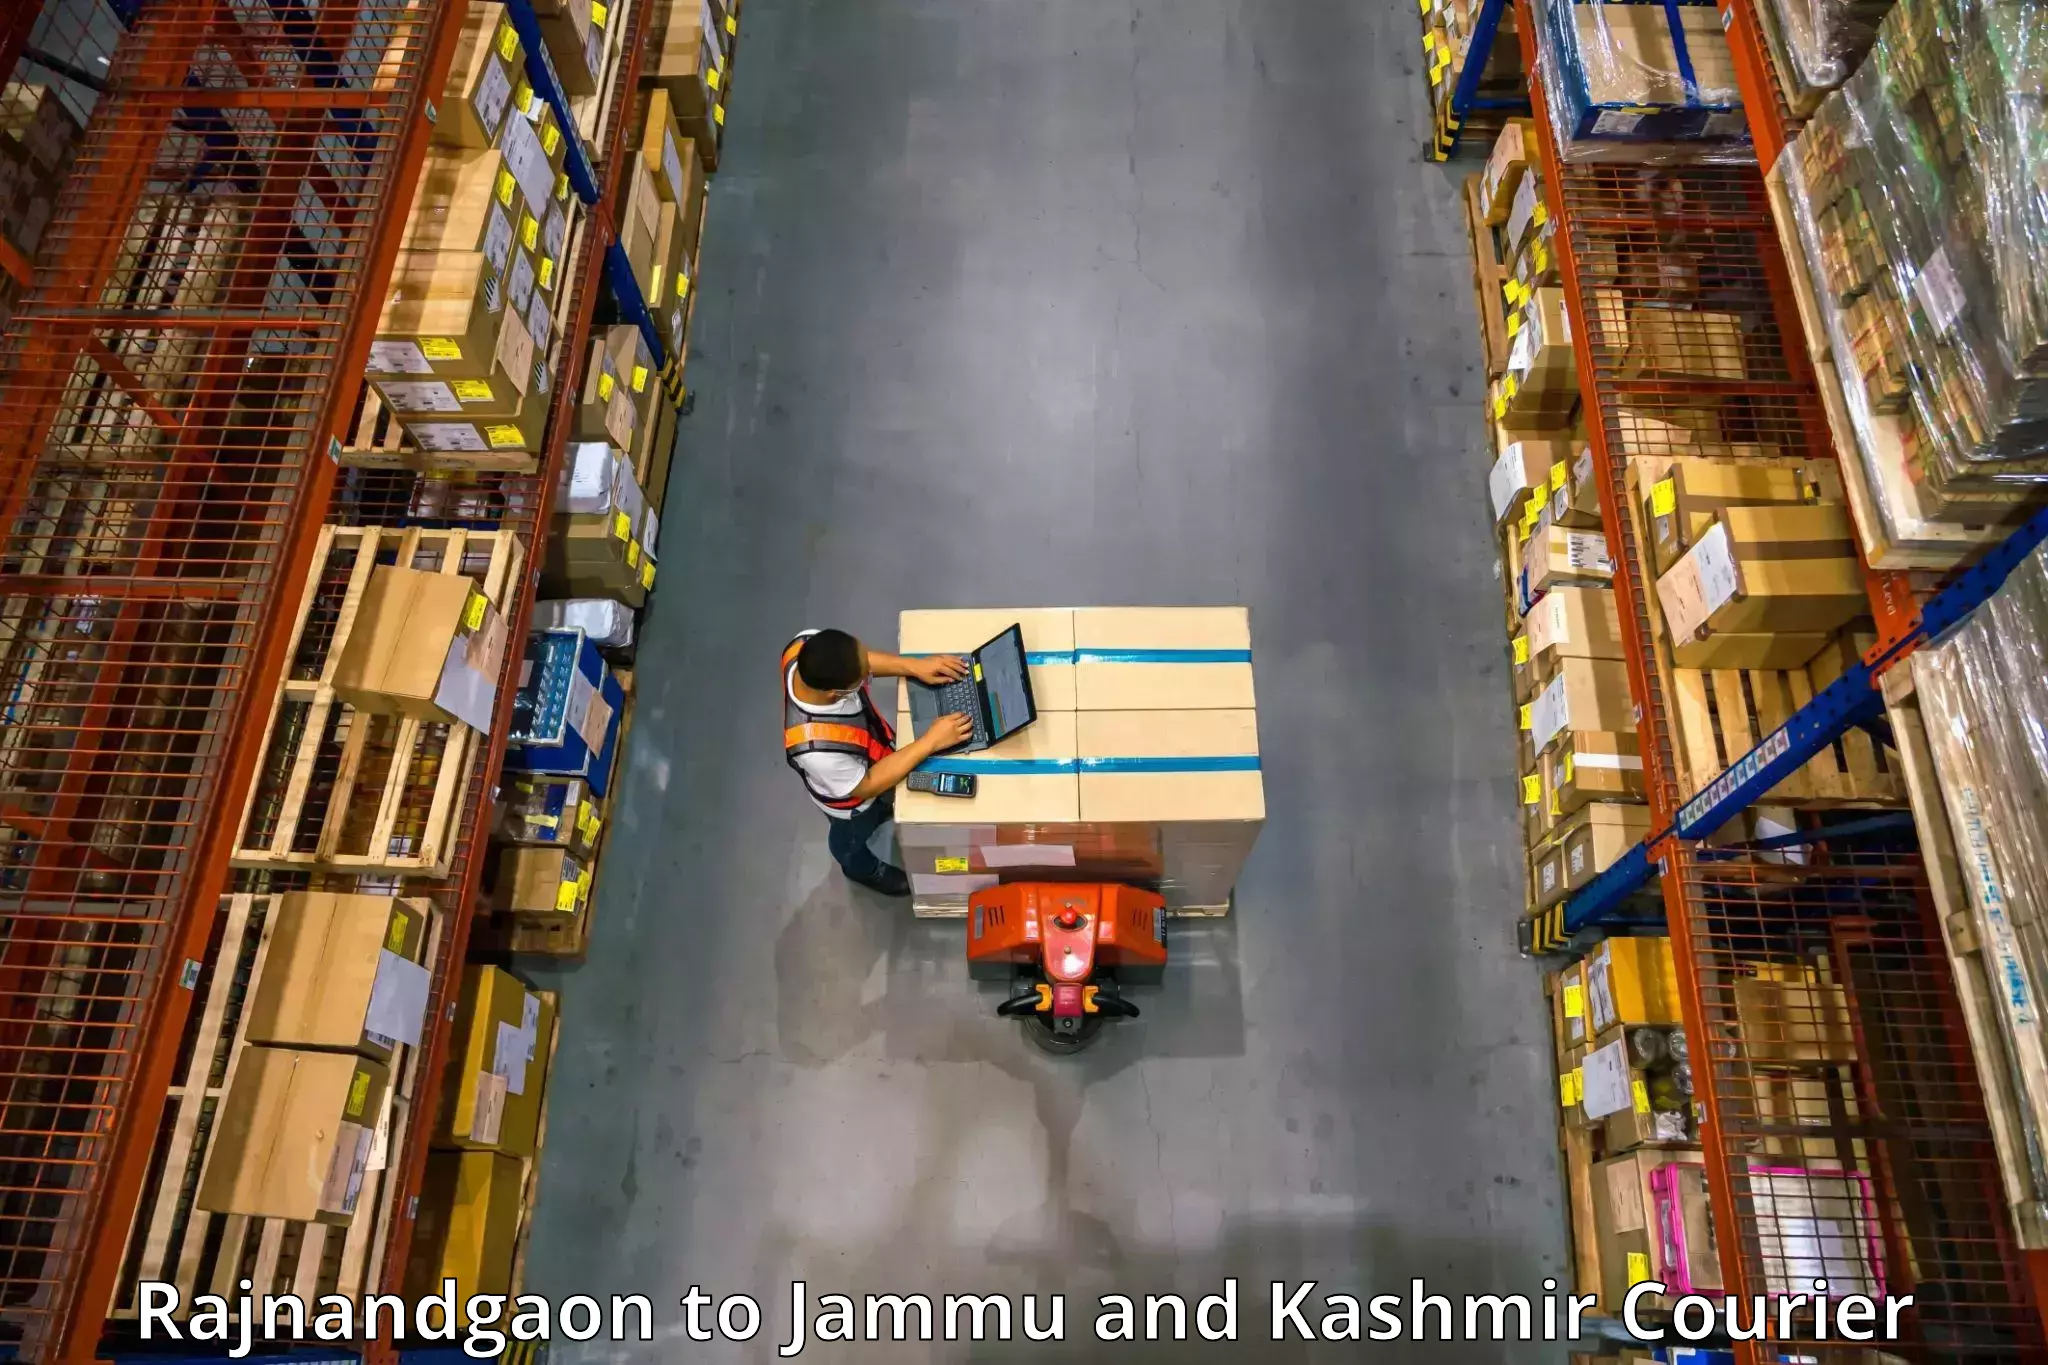 Furniture moving specialists Rajnandgaon to Shopian